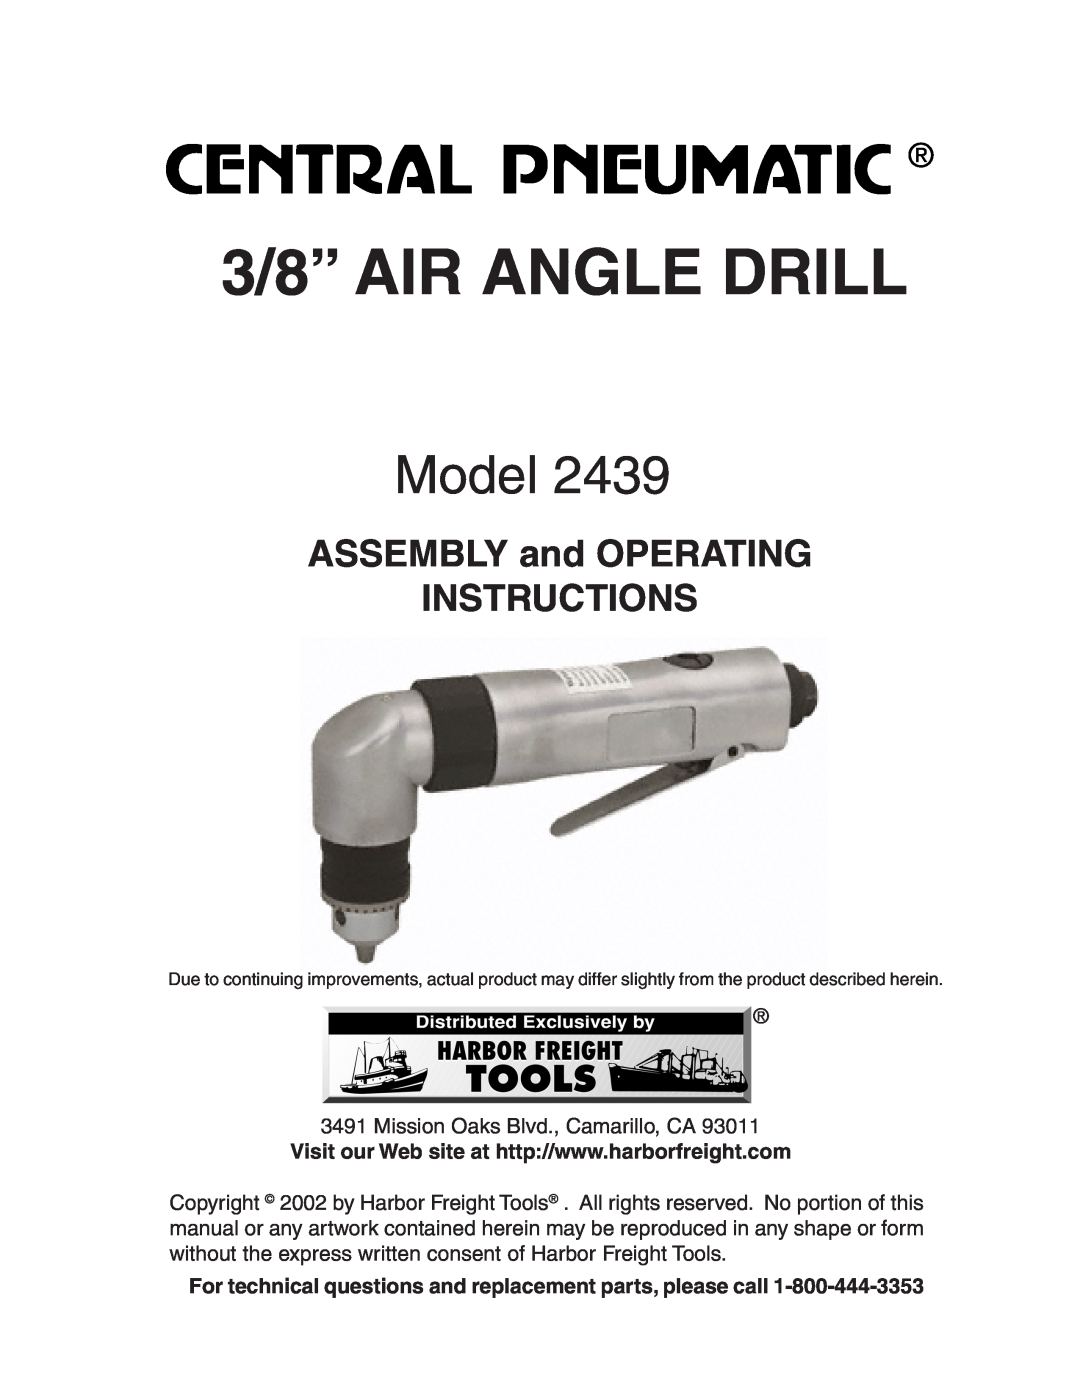 Harbor Freight Tools 2439 operating instructions For technical questions and replacement parts, please call, Model 